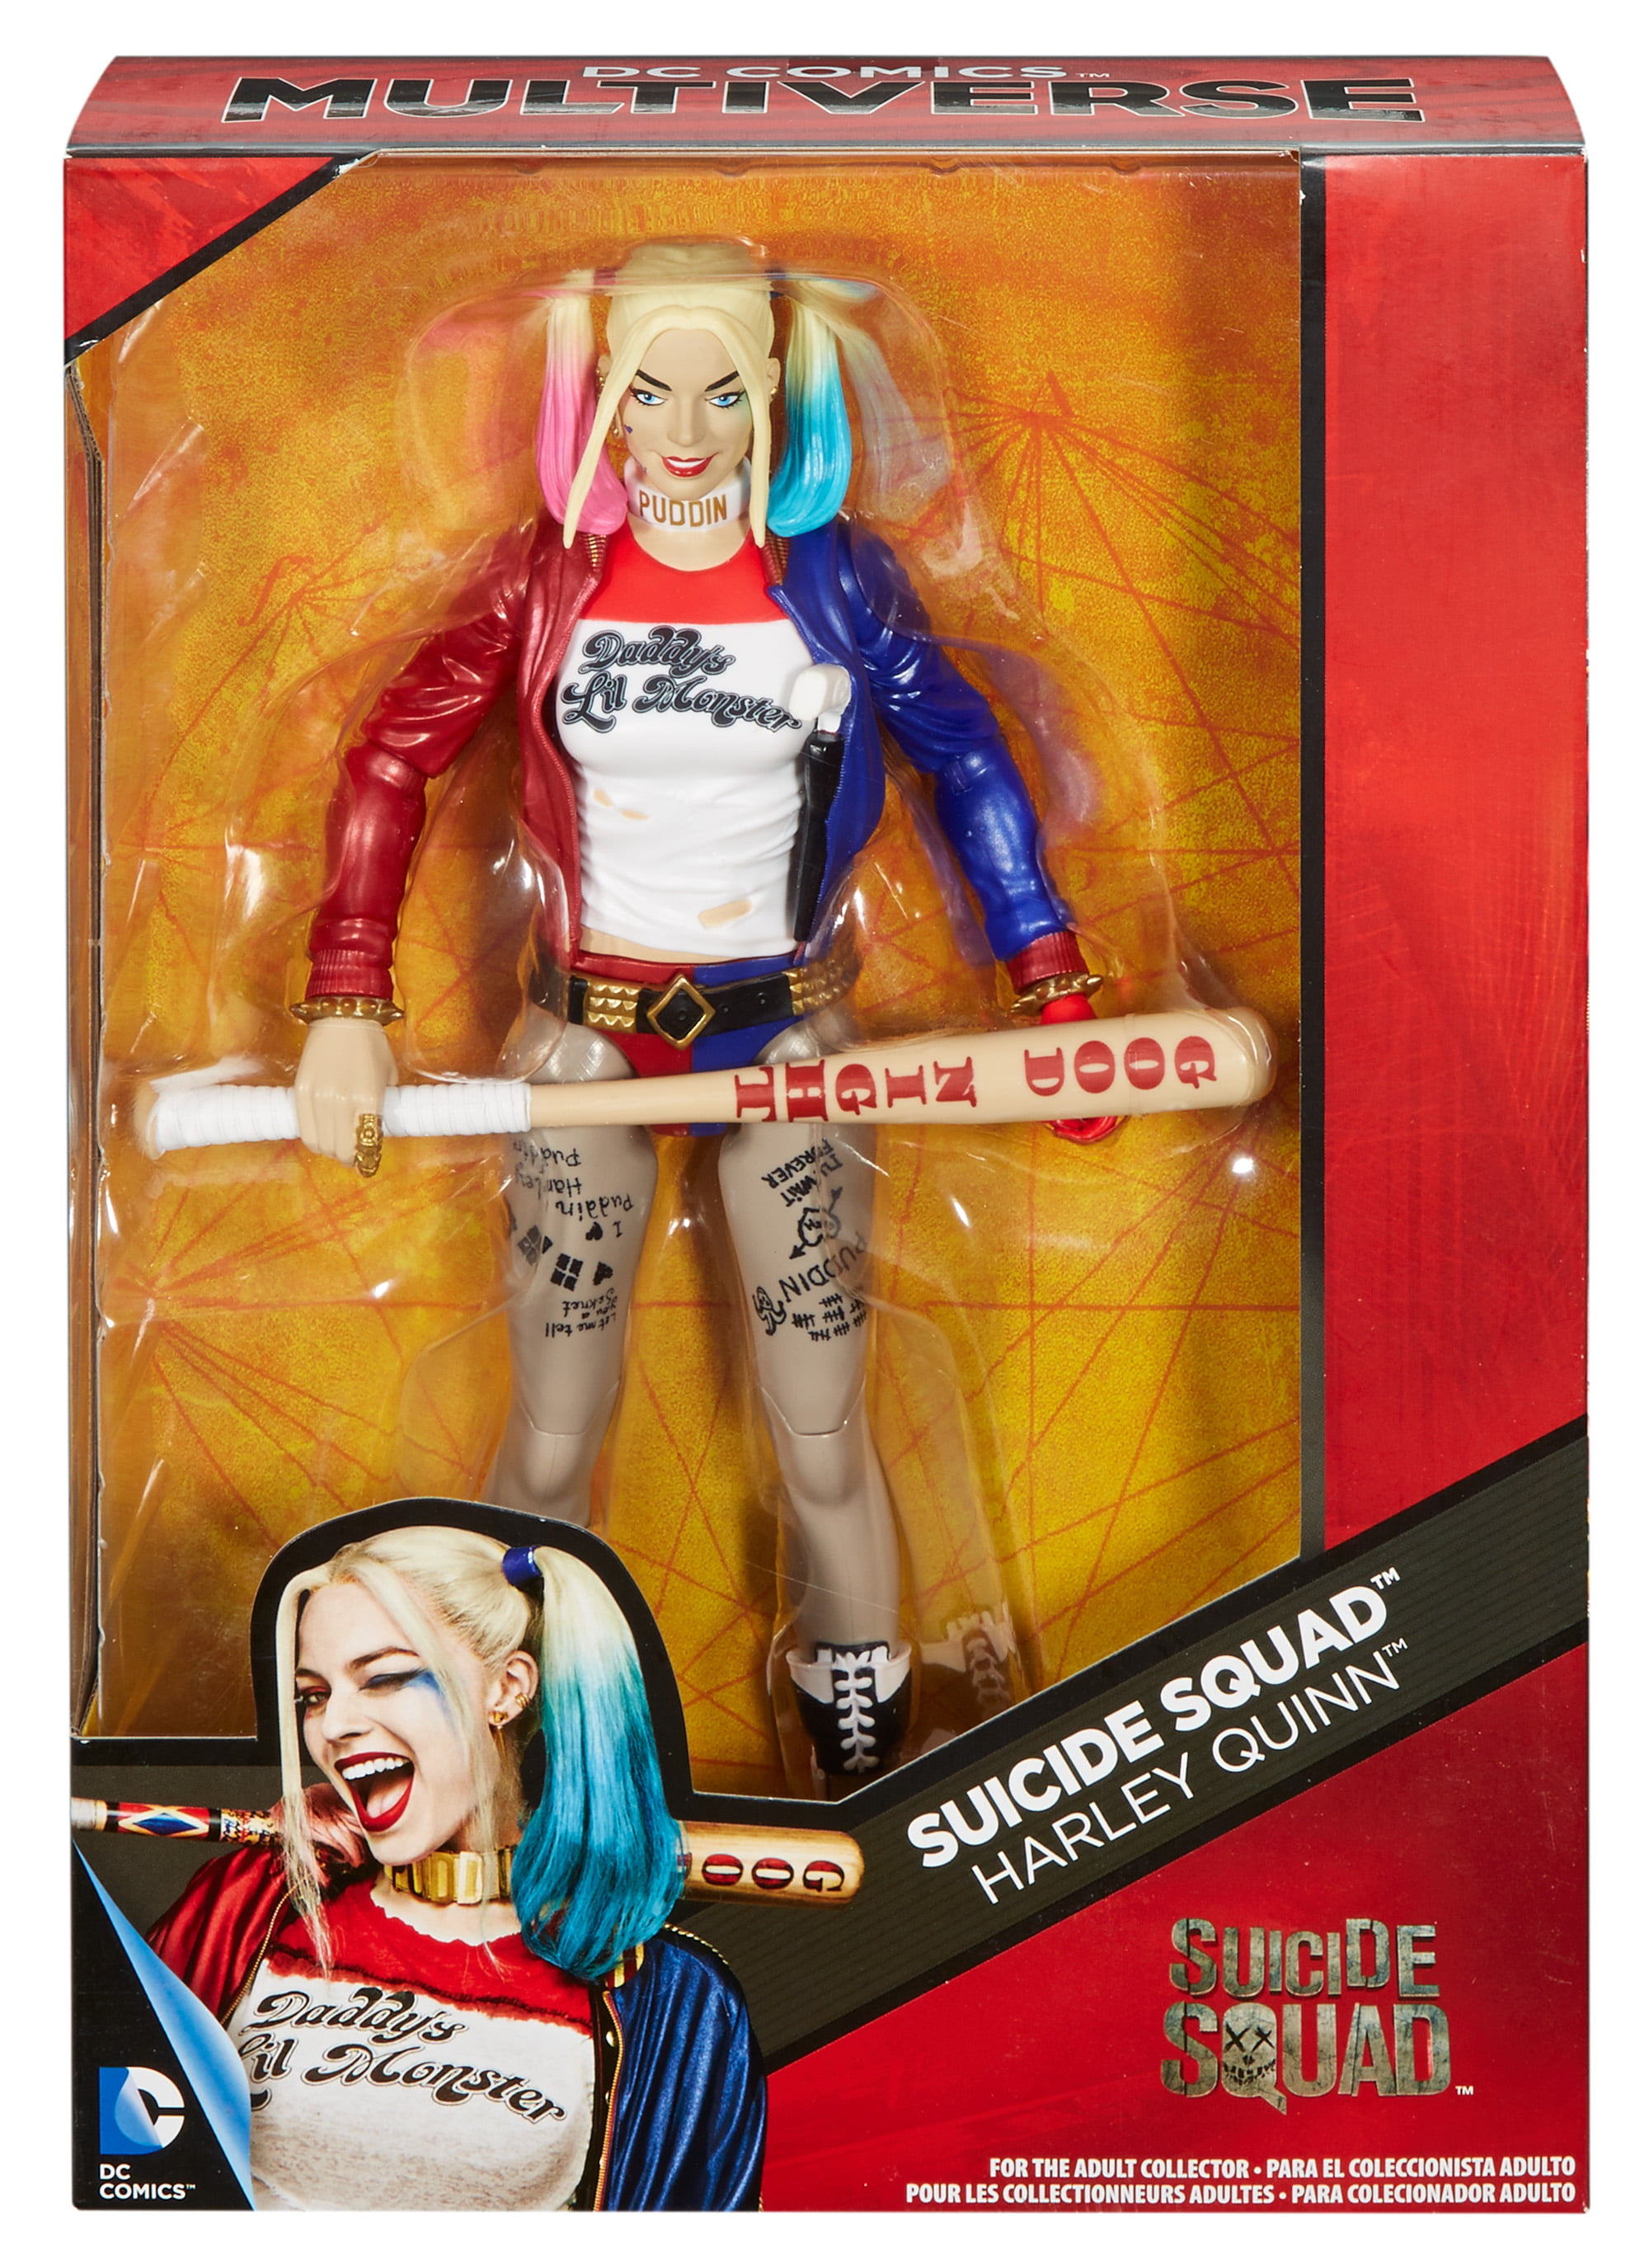 NO TAX 12" Harley Quinn Action Doll Figure Suicide Squad Collectible DC Comics 